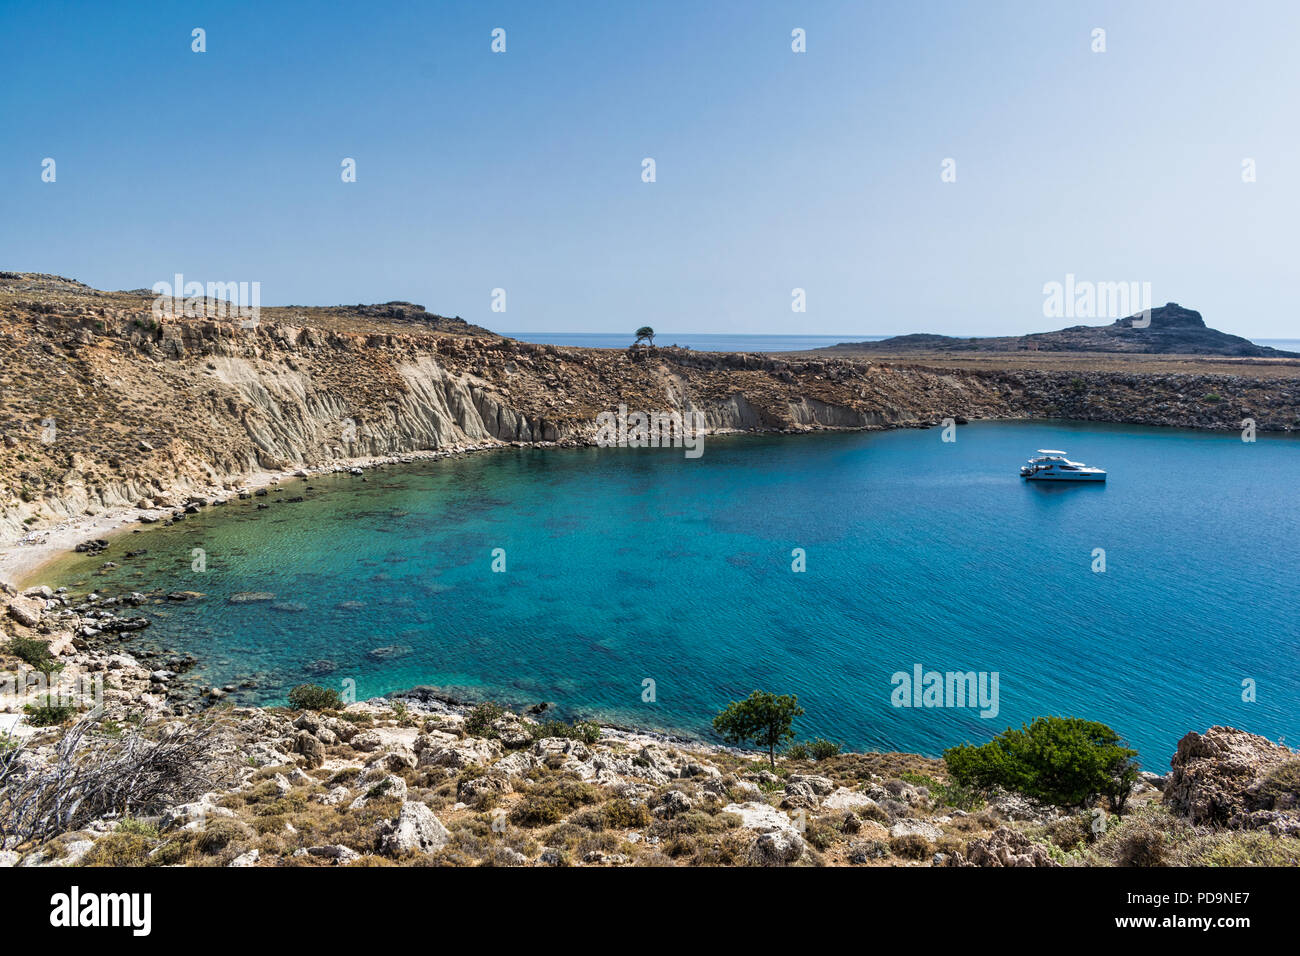 This is a remote harbour near Lindos Greece on the Island of Rhodes.  The water is turquoise blue with a single achord motor boat Stock Photo